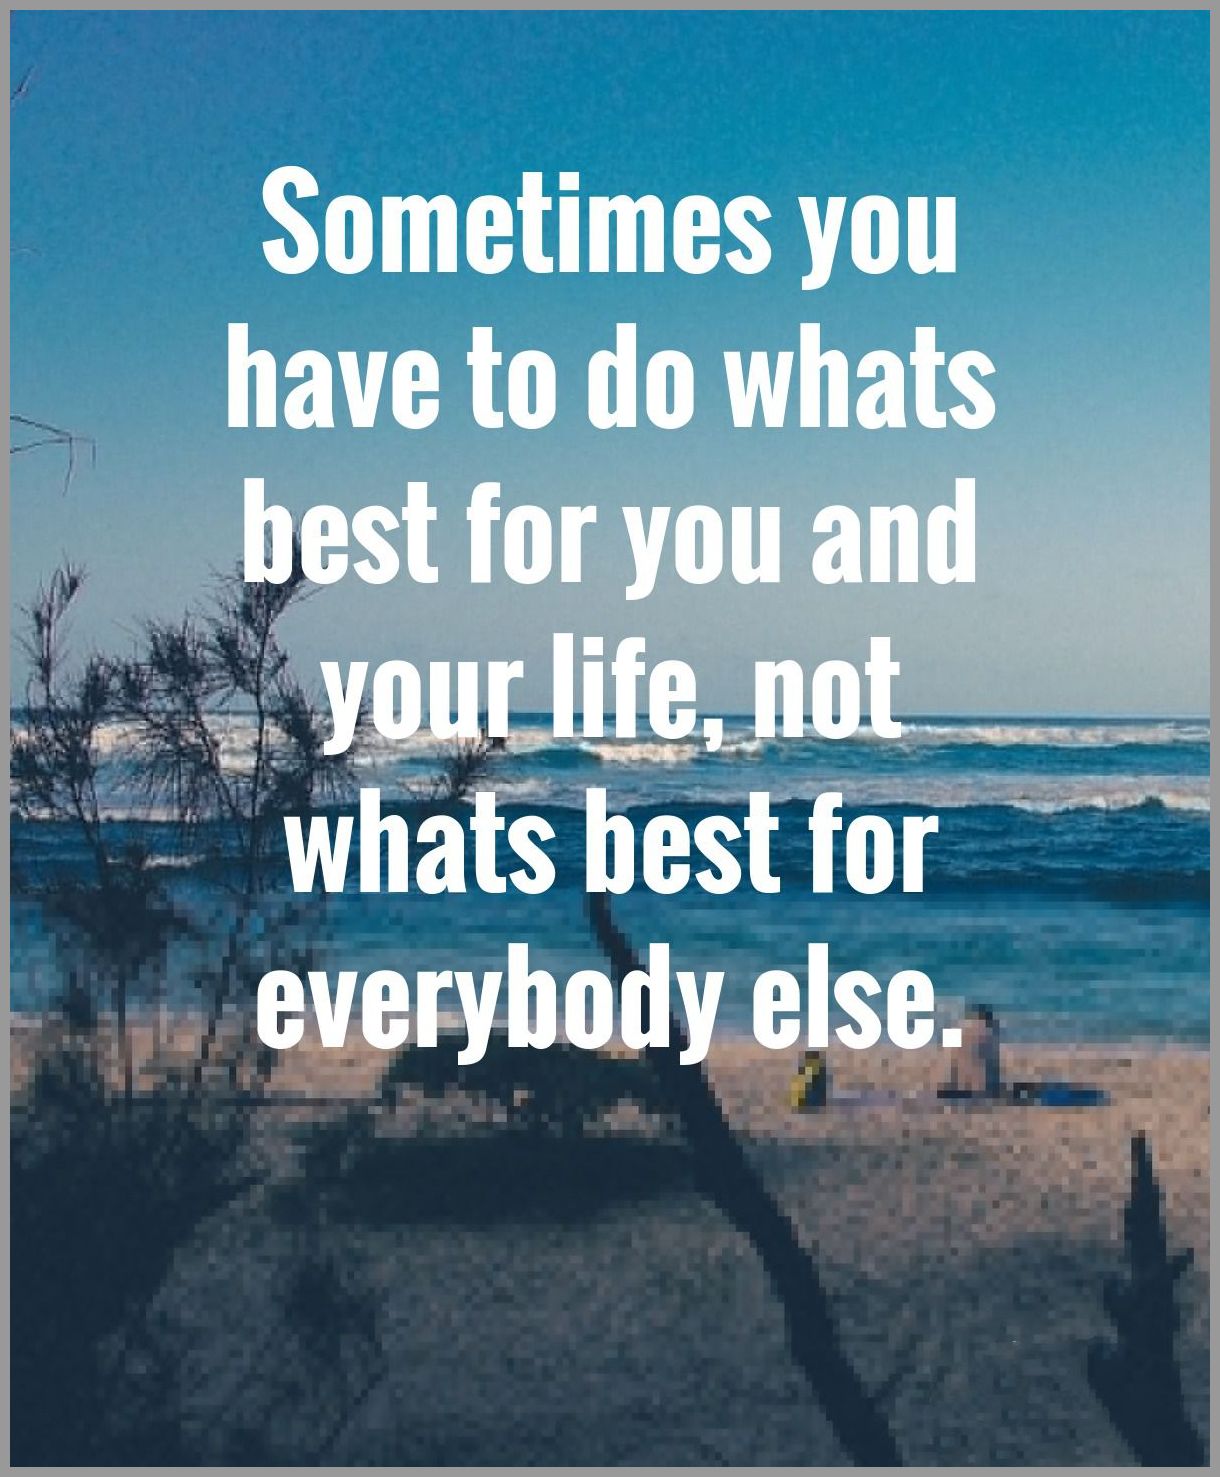 Sometimes you have to do whats best for you and your life not whats best for everybody else